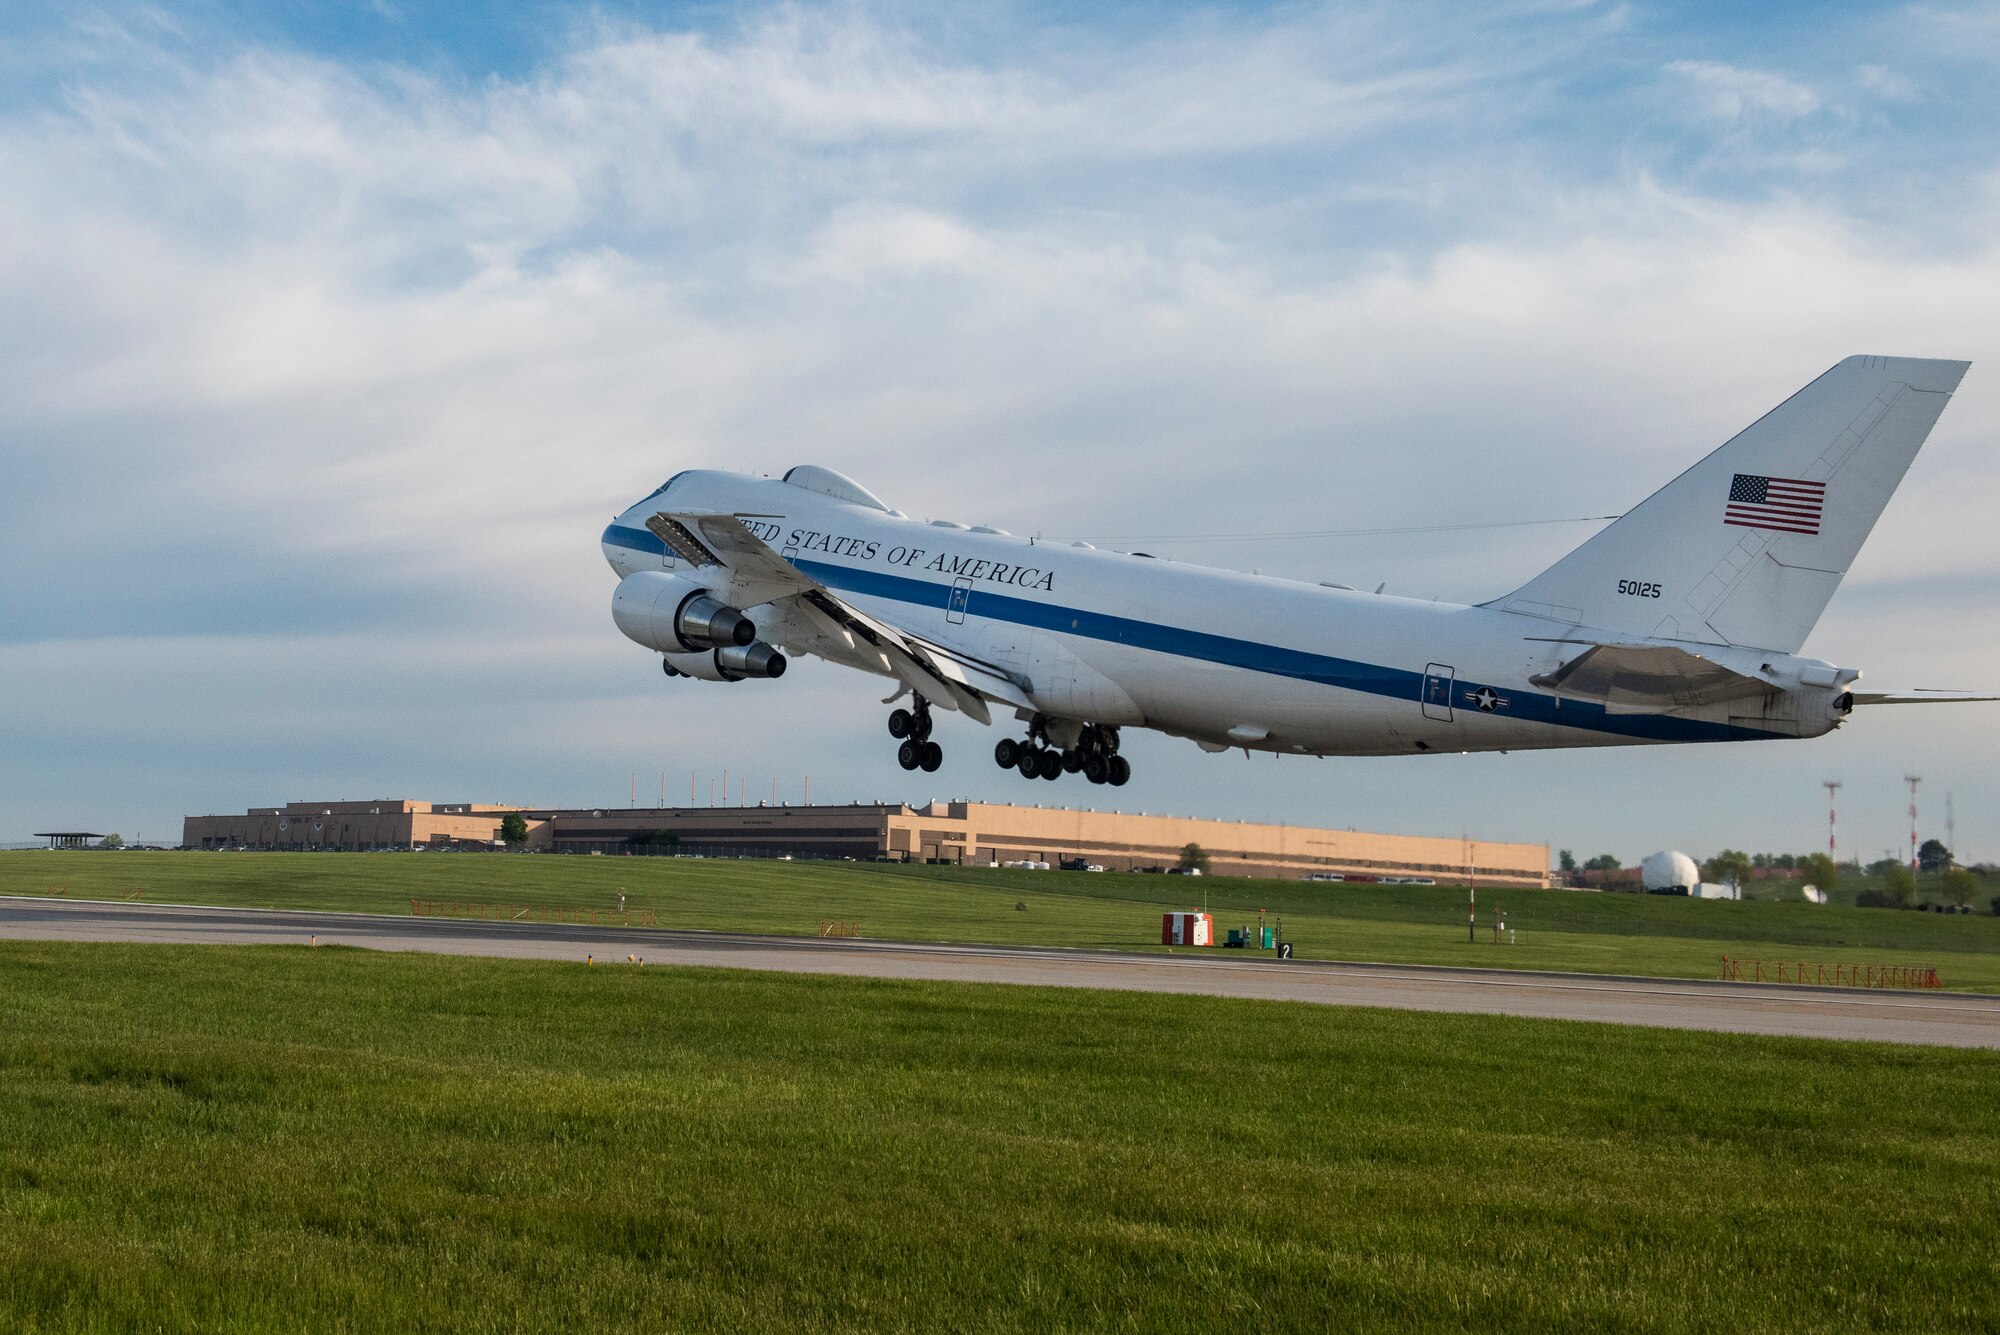 An E-4B takes off over Building D